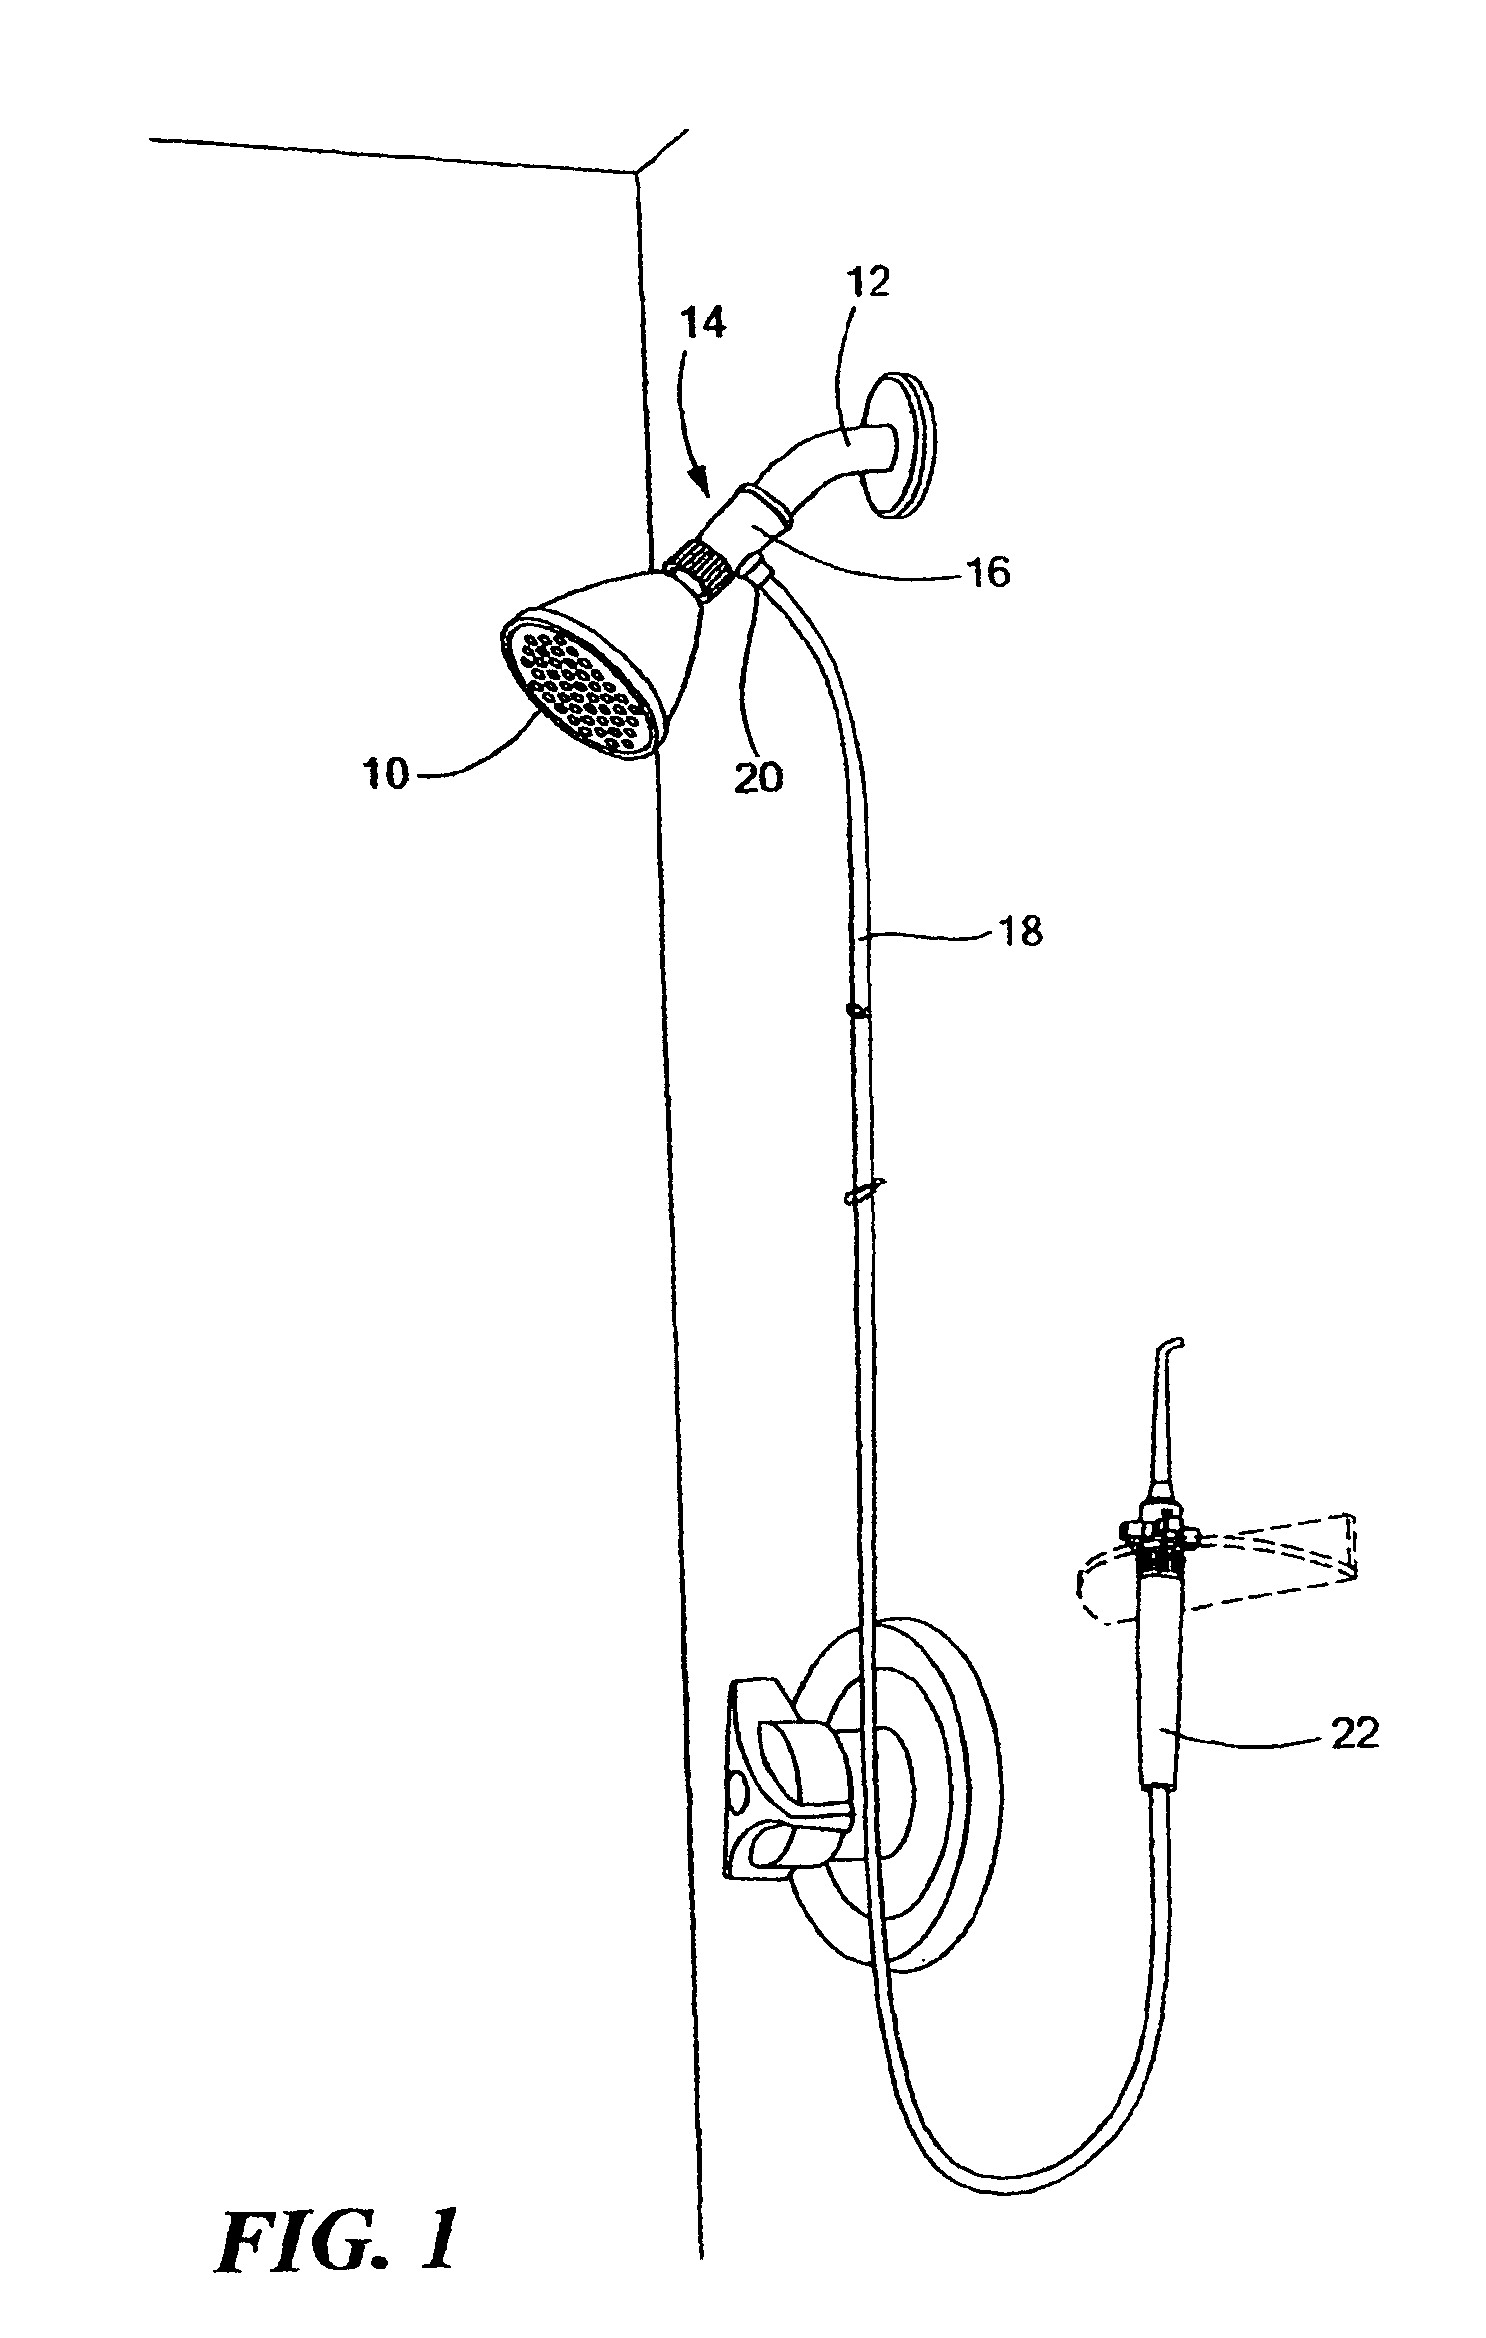 Shower head attachment for mixing liquids used to clean teeth